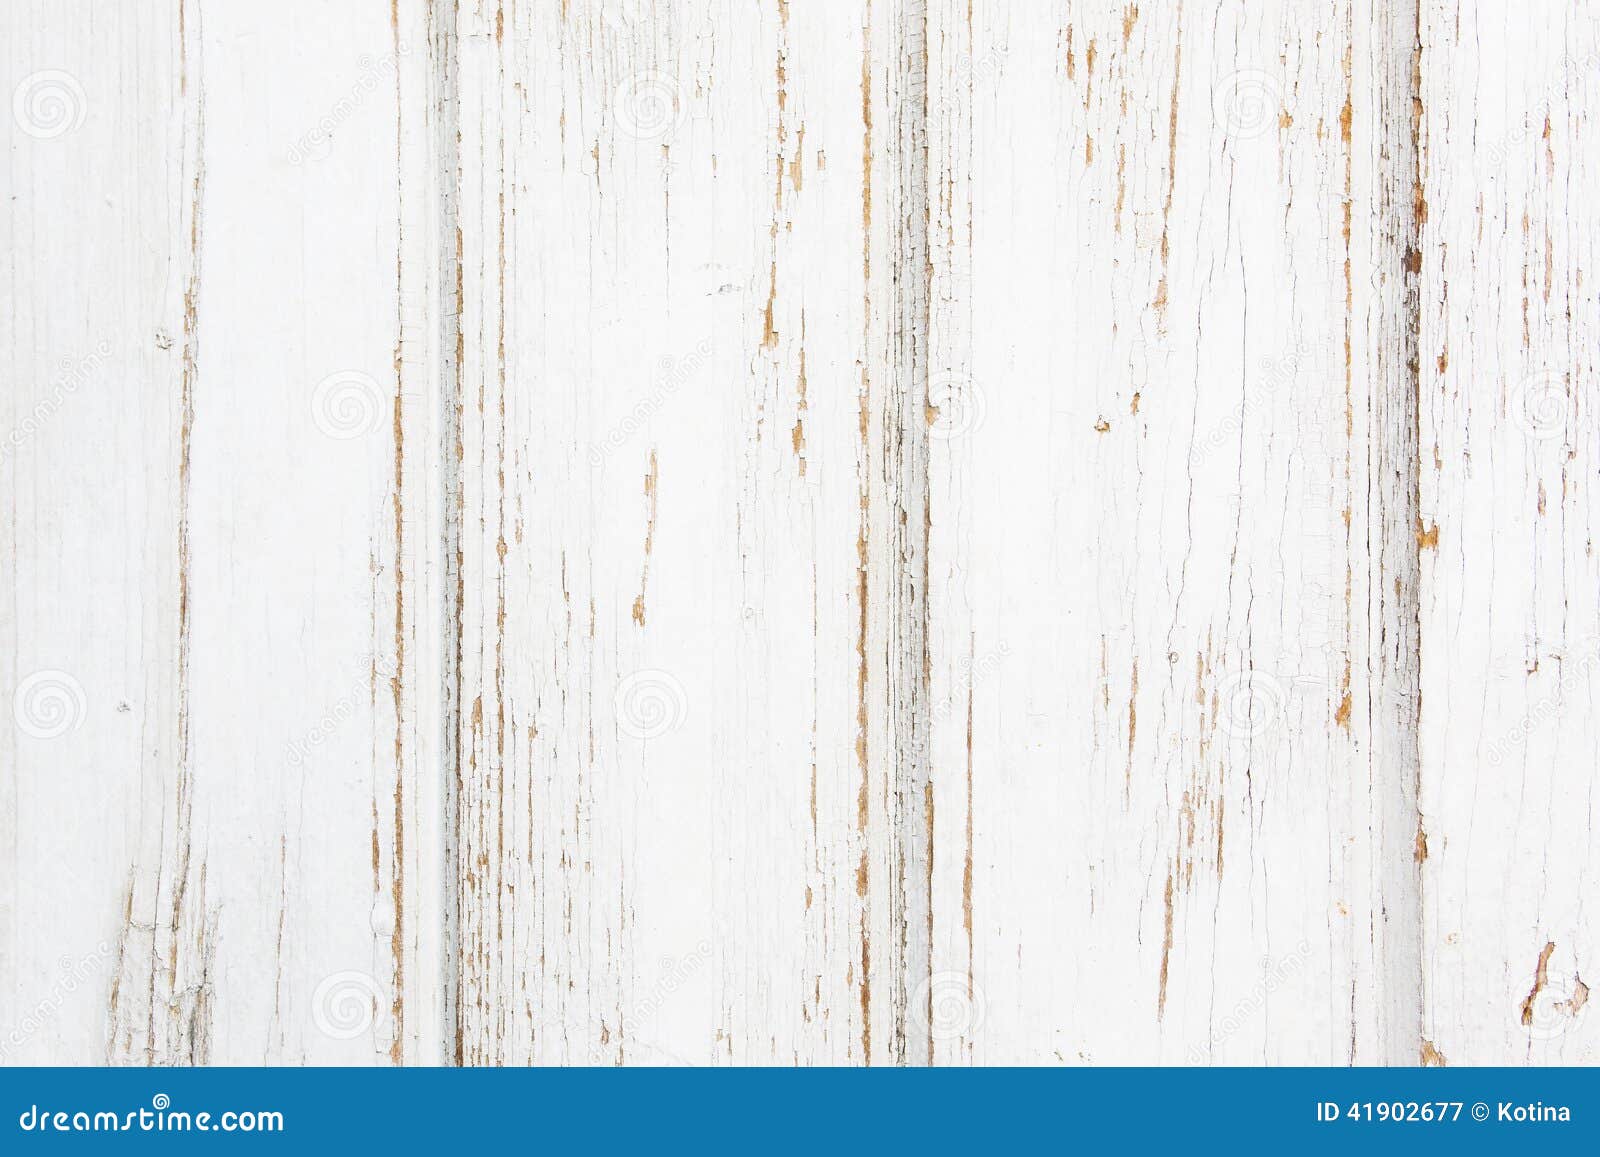 wood old plank white texture background